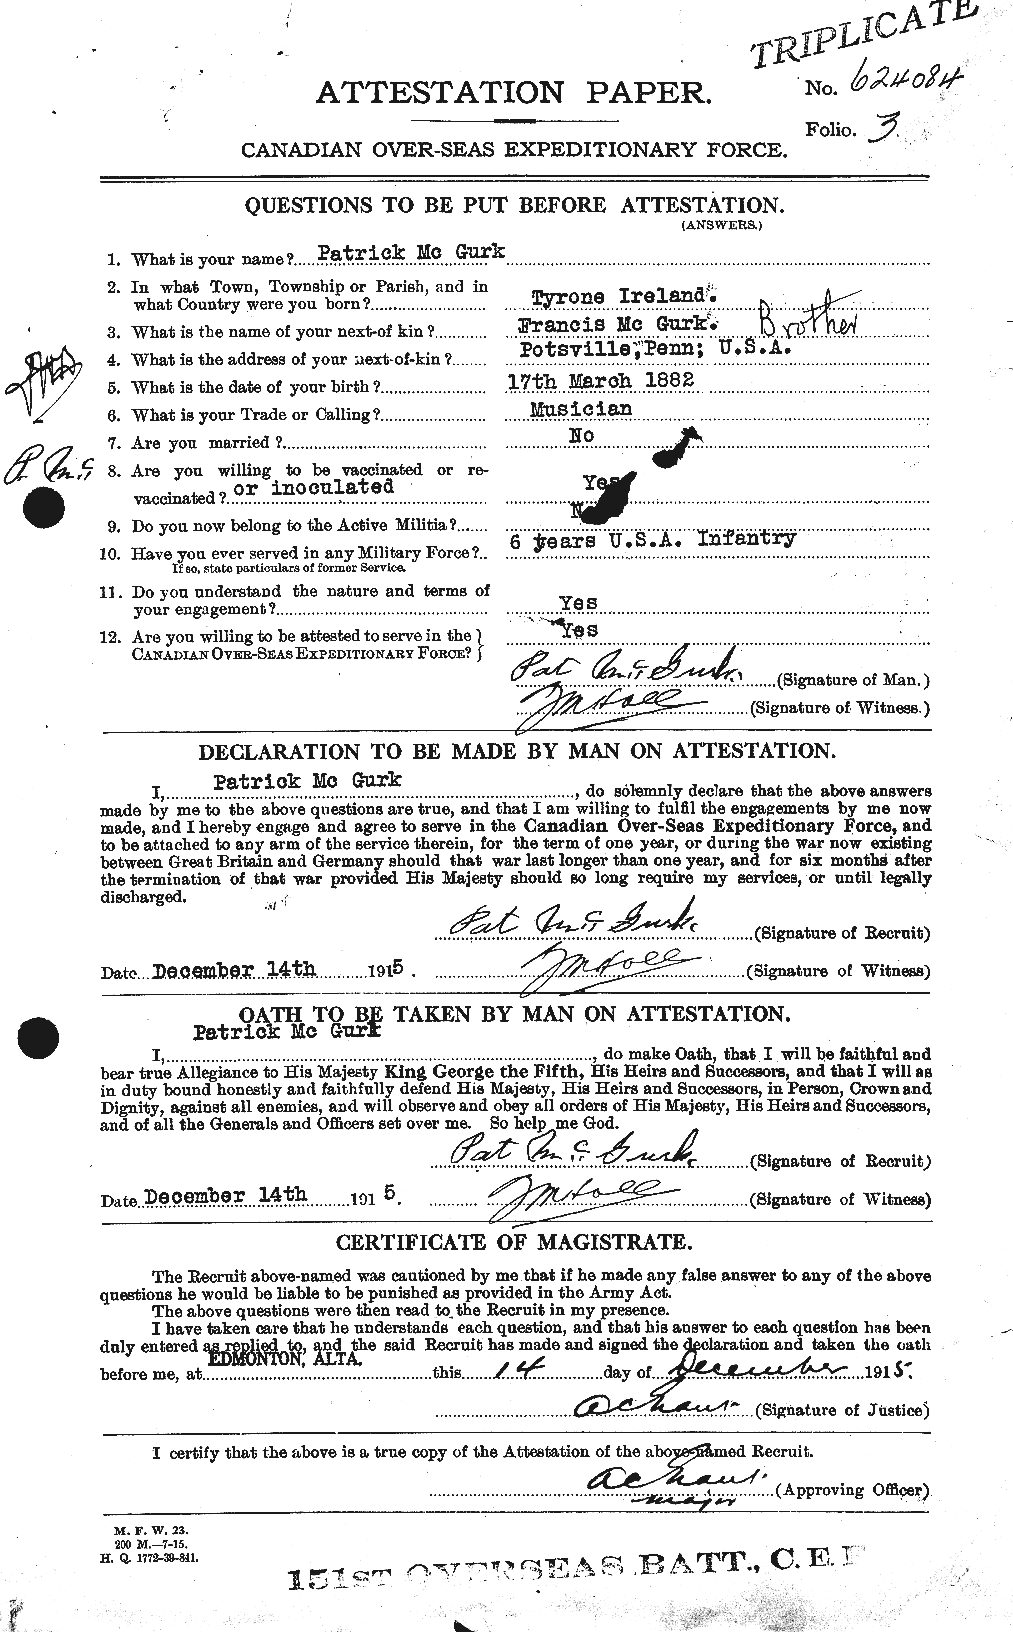 Personnel Records of the First World War - CEF 524178a